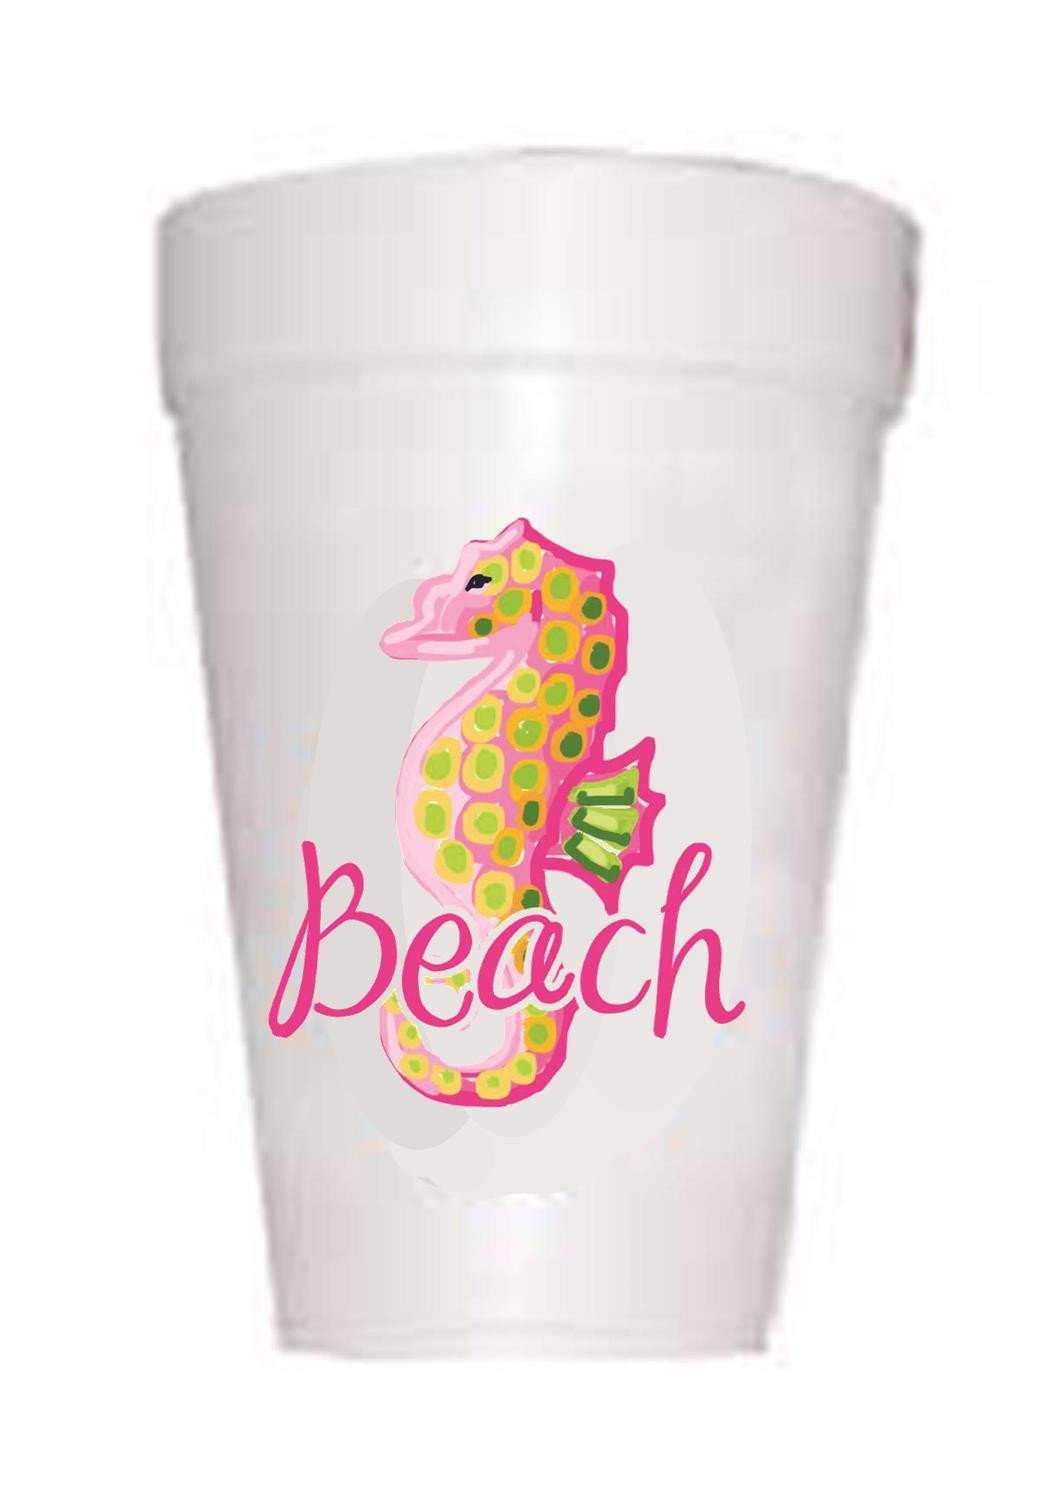 Seahorse on styrofoam cups with text Beach